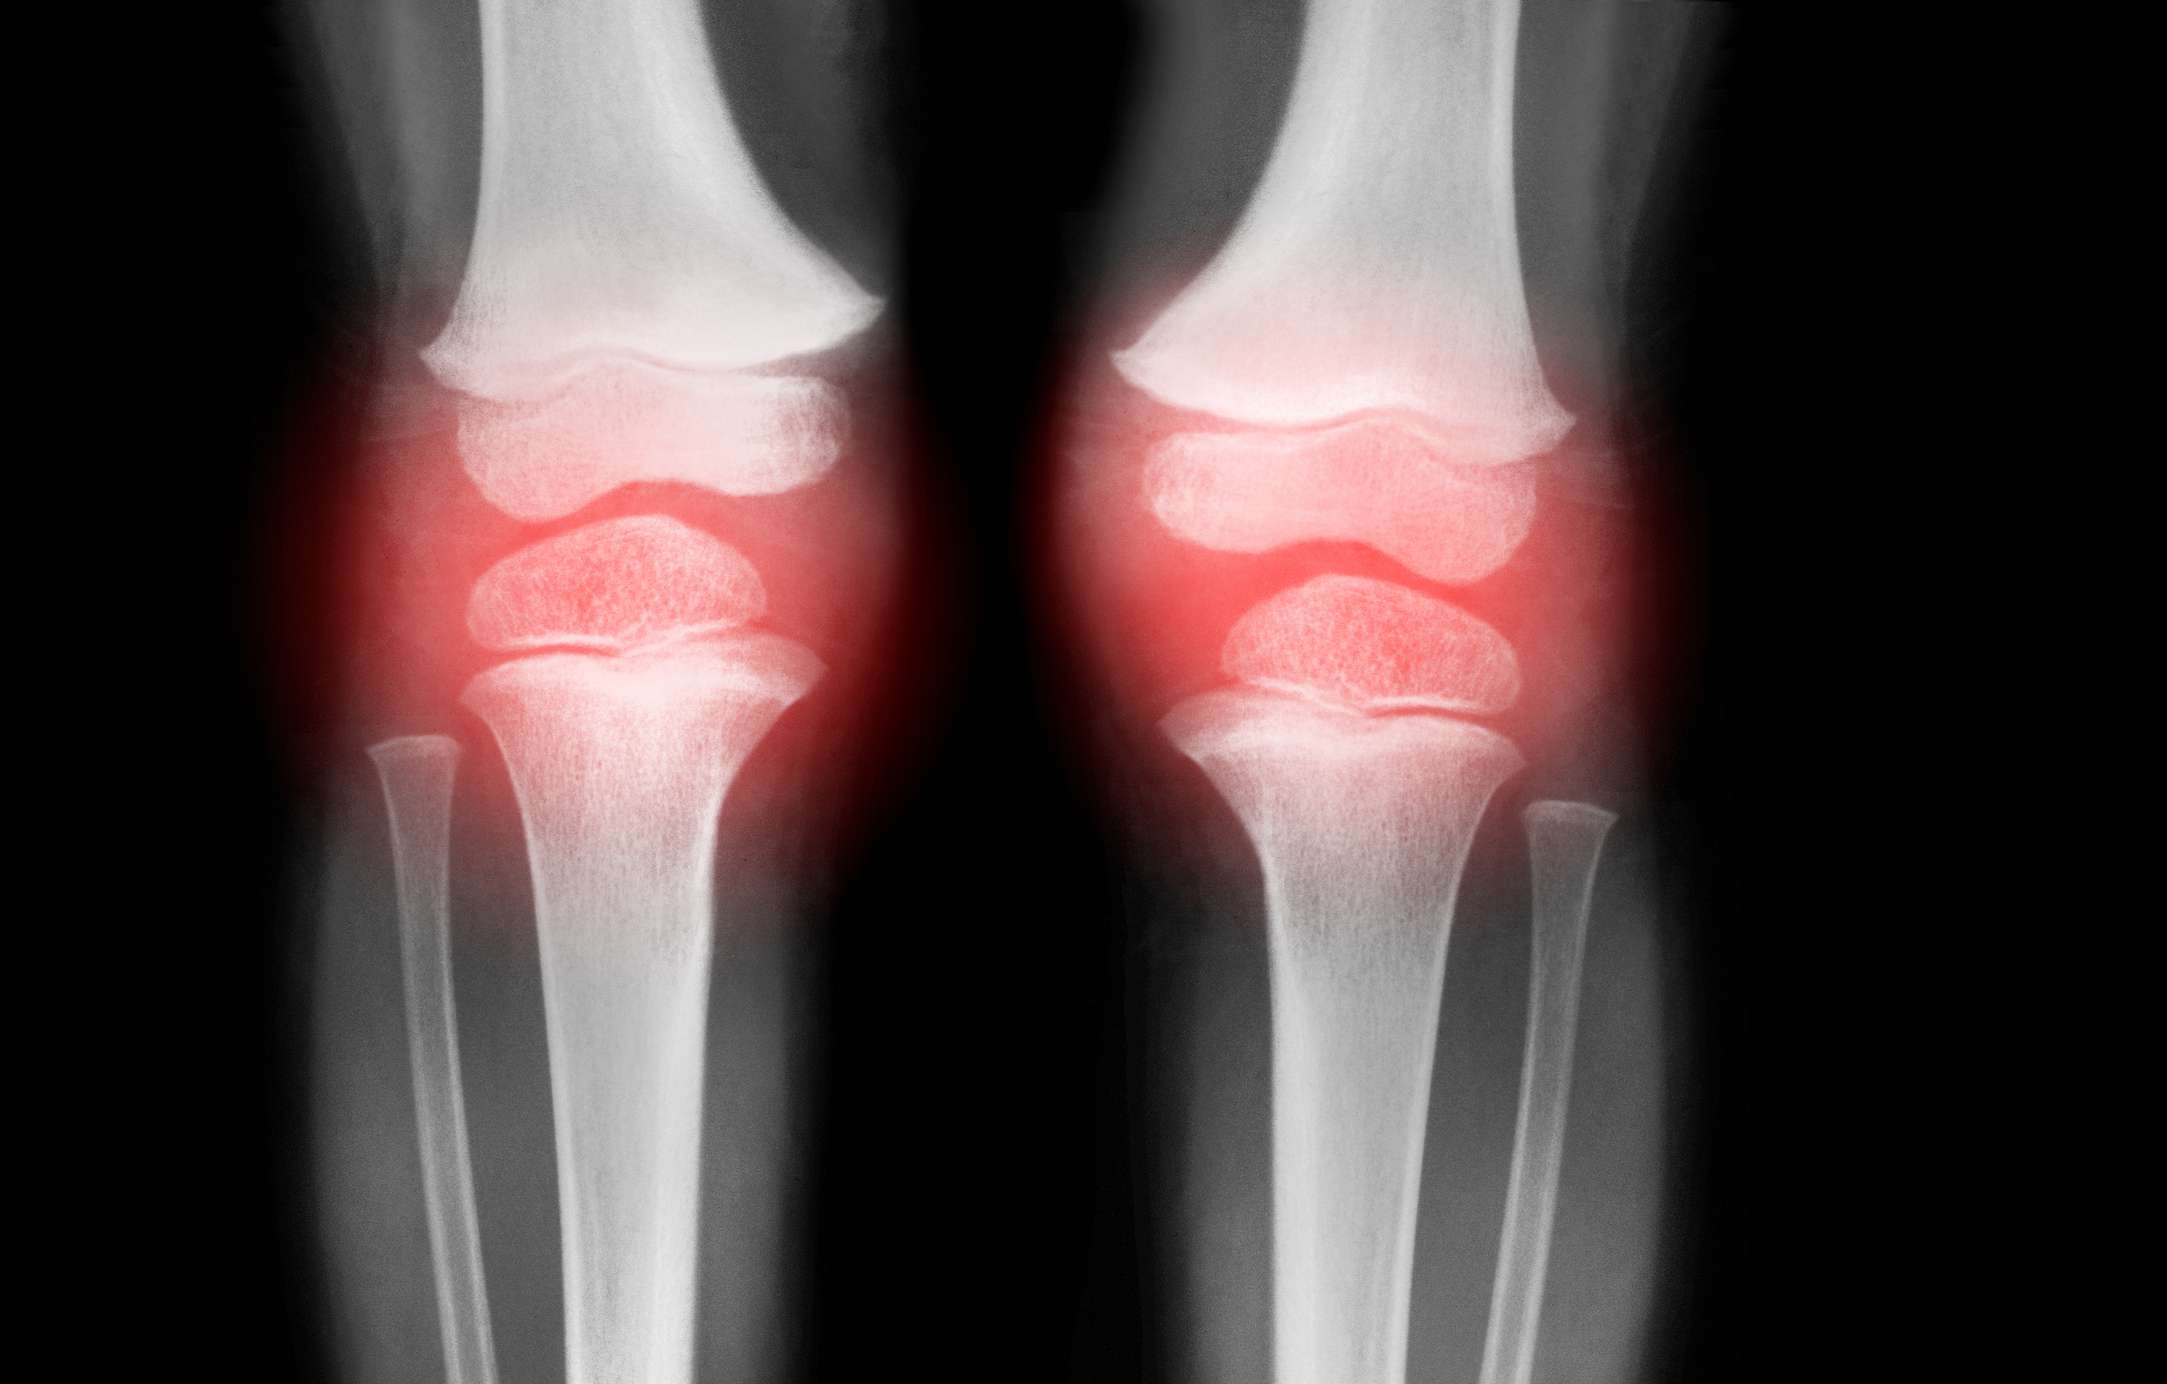 Can Osteoarthritis Be Reversed?